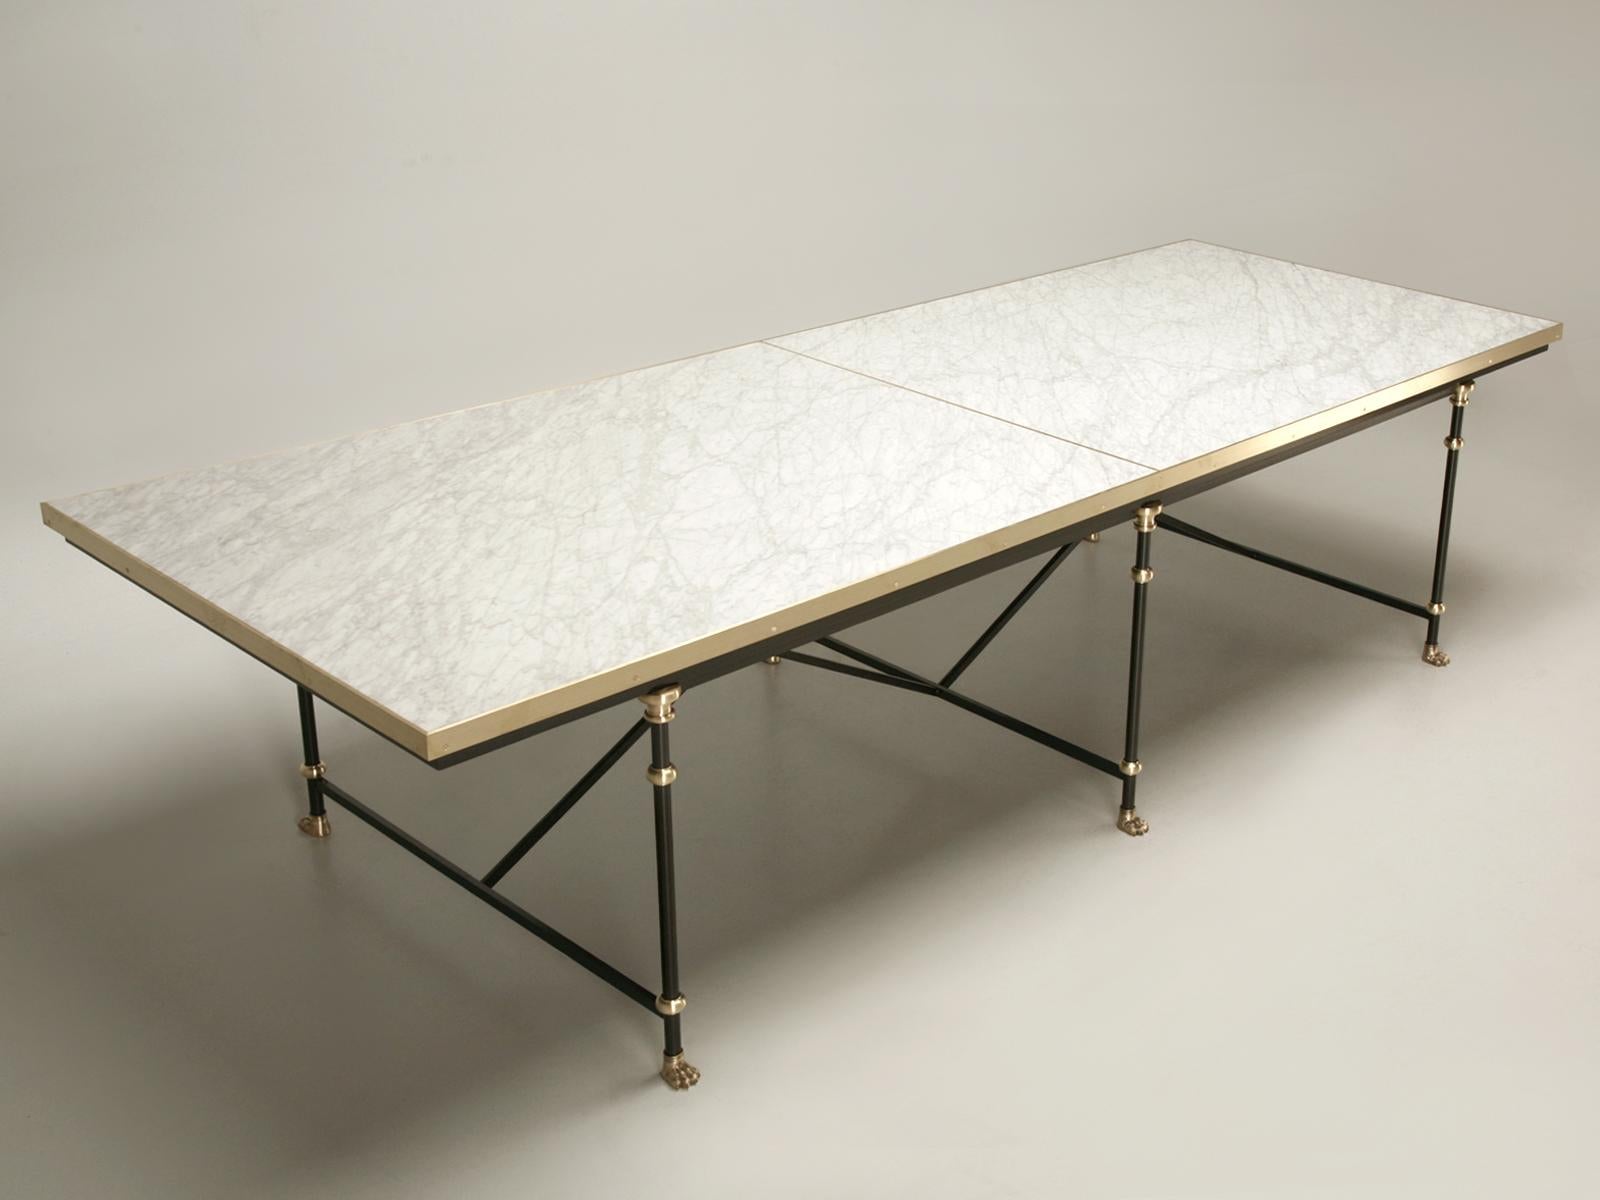 Another Old Plank exclusive offering is our French Industrial Style Dining Table. The Industrial or some may even call it Modern Dining Table Base is constructed of cold roll steel with Solid brass and Bronze fittings. Marble top is honed and edged